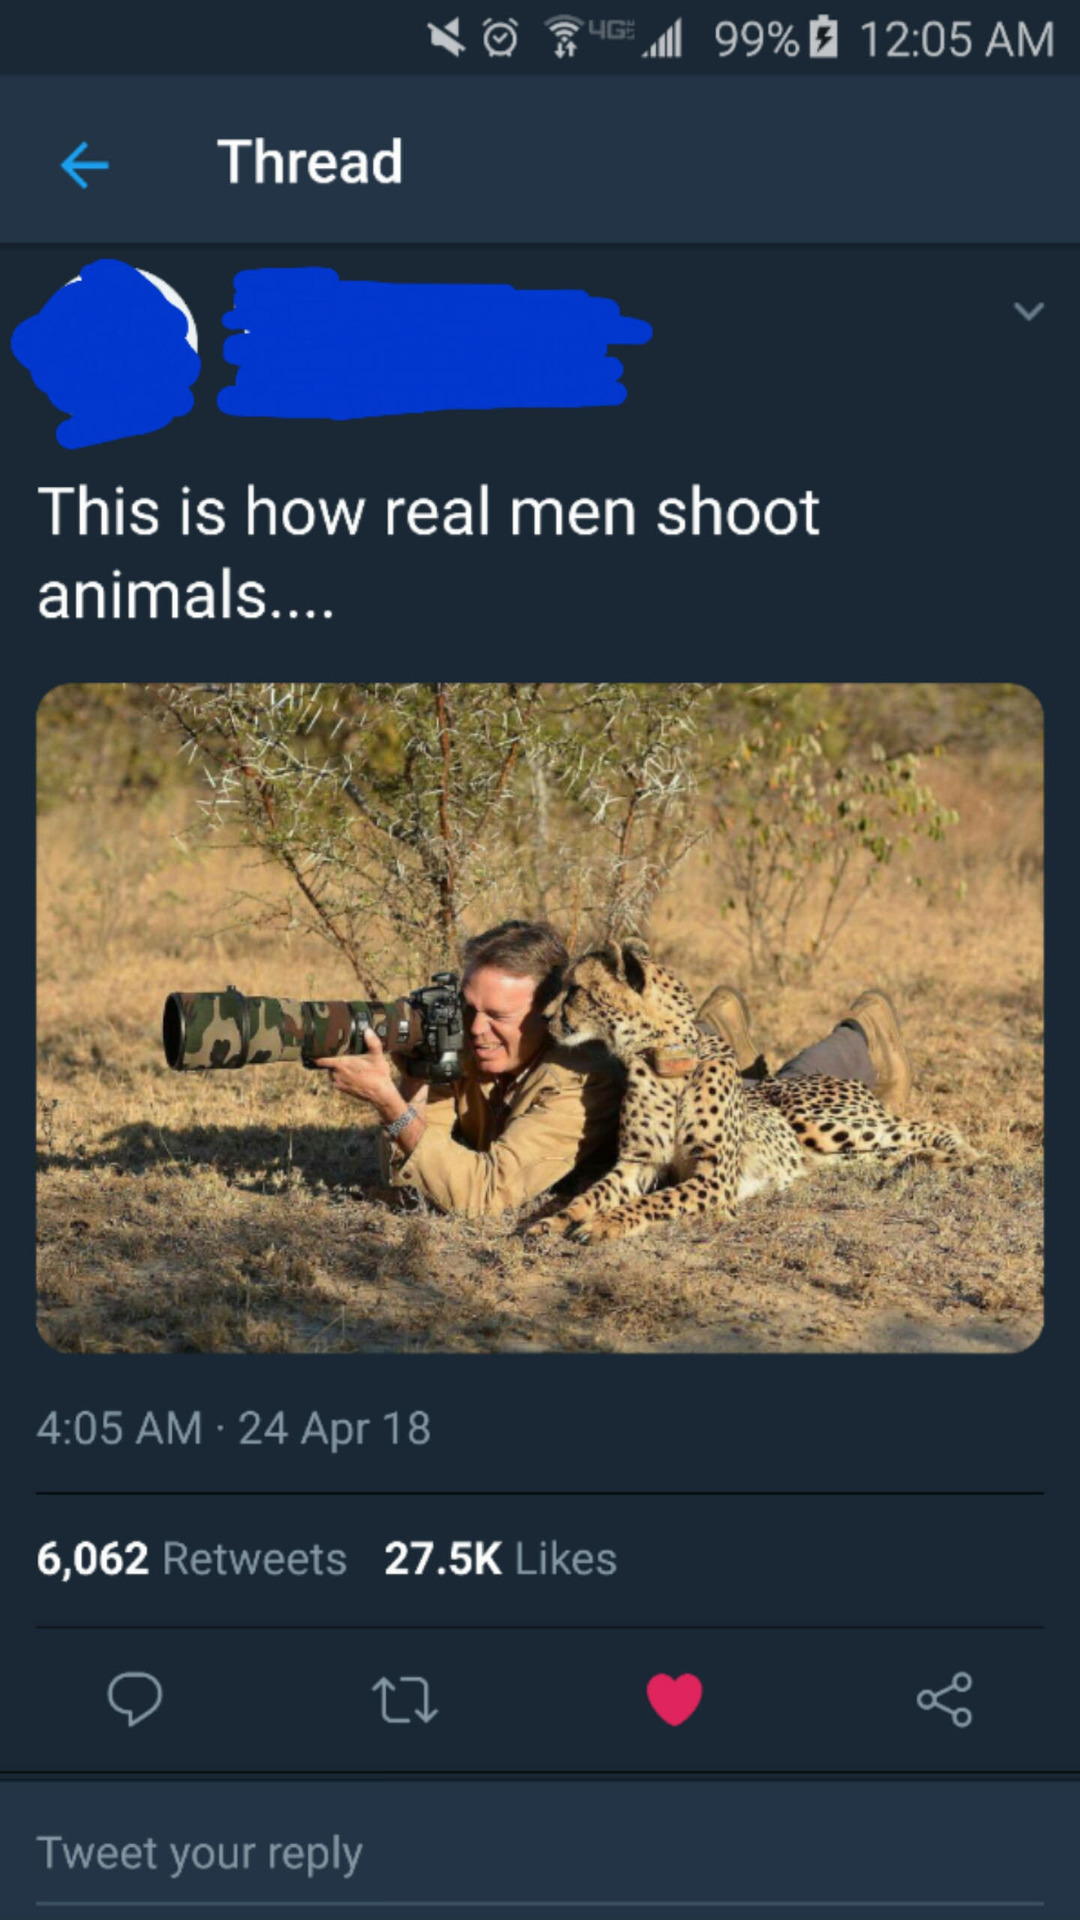 funny photography - 4G Il 99% 5 f Thread This is how real men shoot animals... 24 Apr 18 6,062 Tweet your